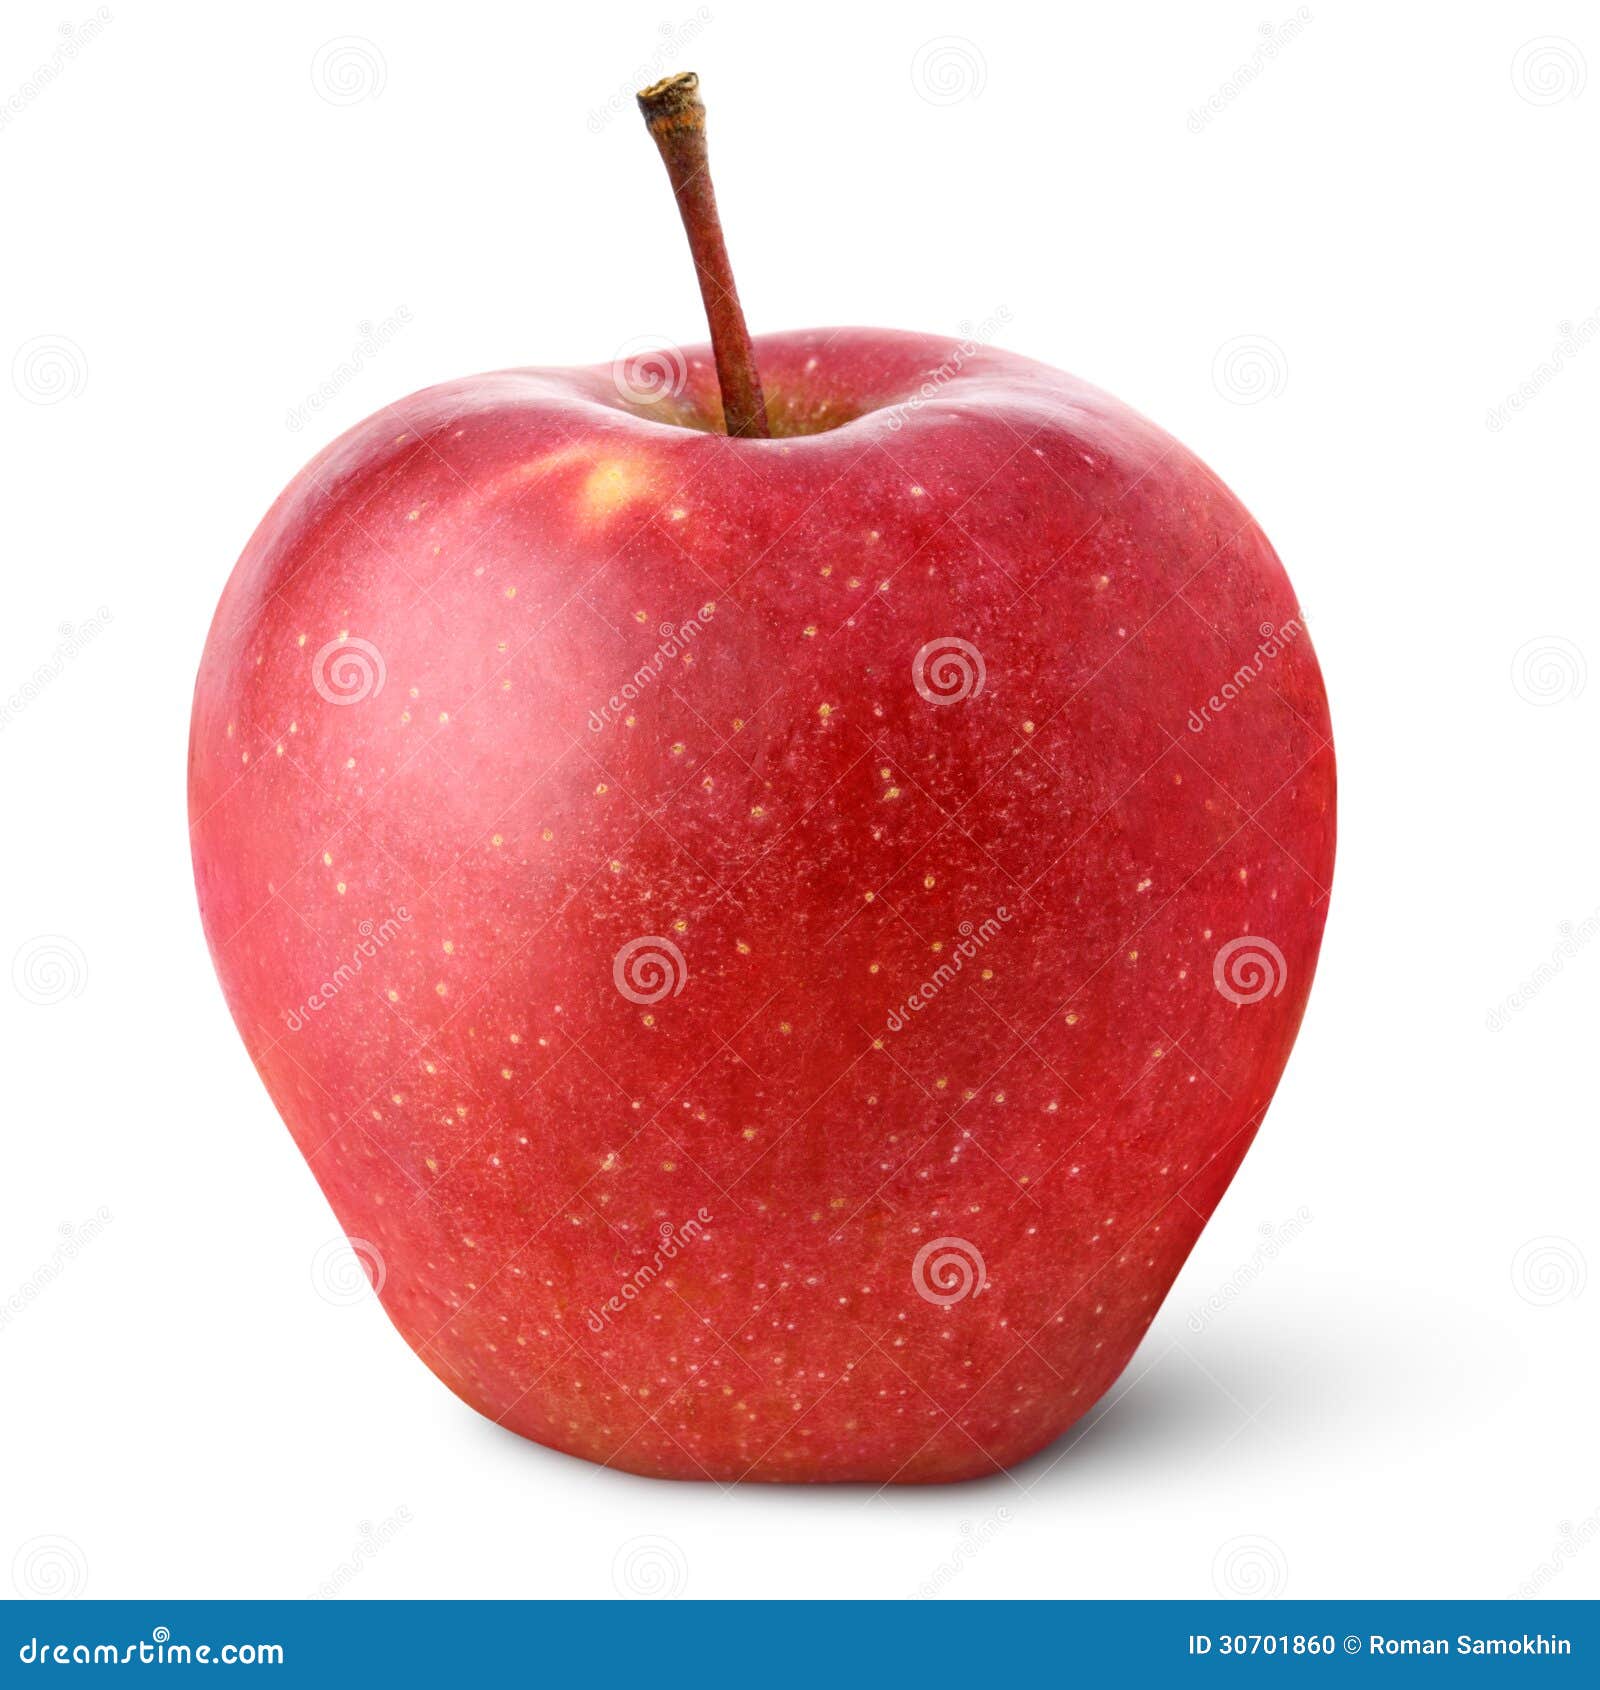 https://thumbs.dreamstime.com/z/red-apple-isolated-white-single-clipping-path-30701860.jpg